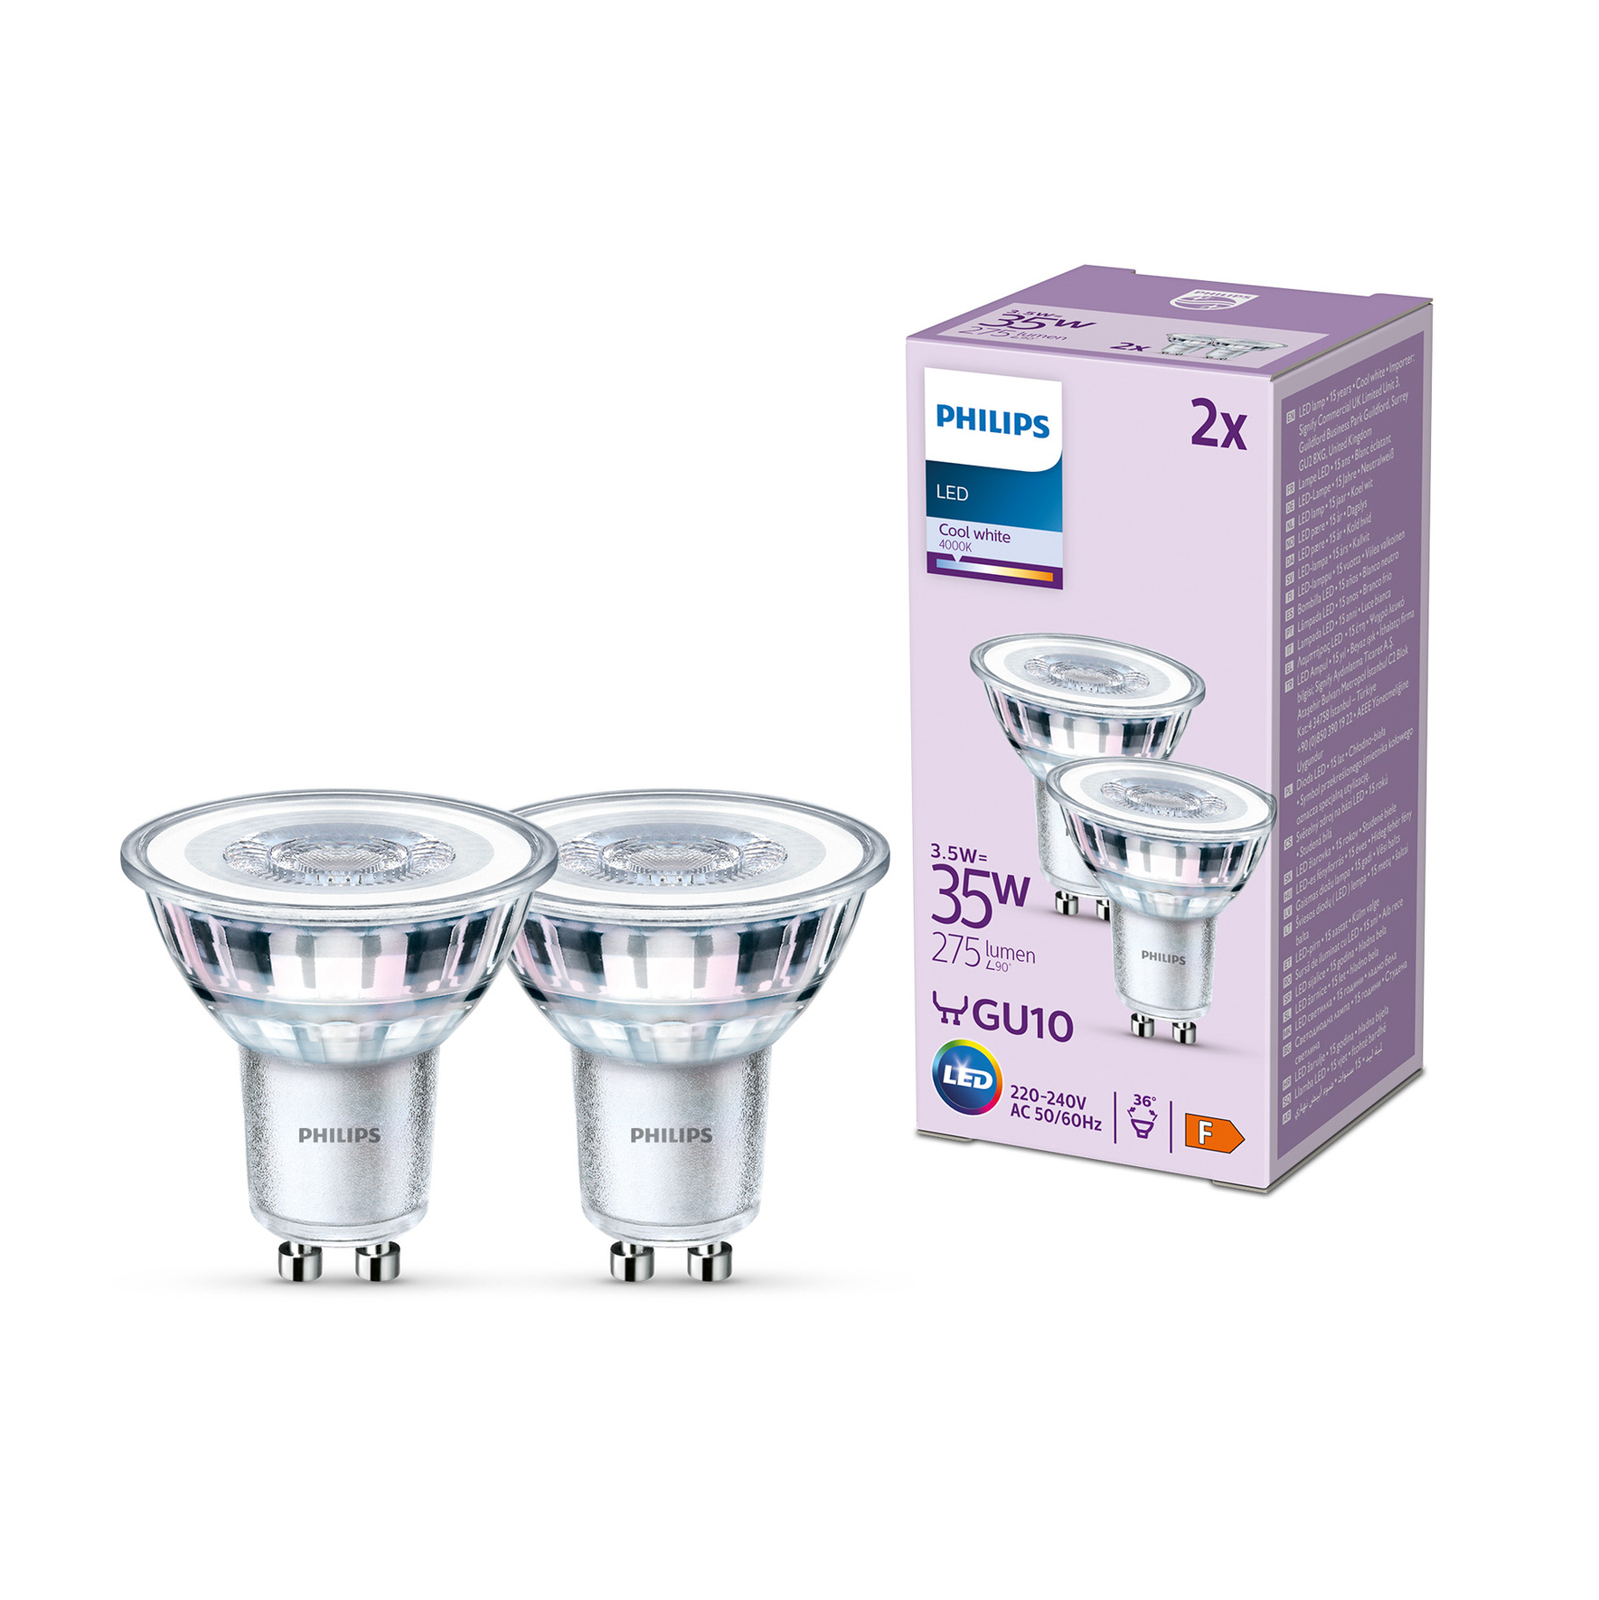 Philips LED GU10 3,5 W 275 lm 840 claire 36° x2